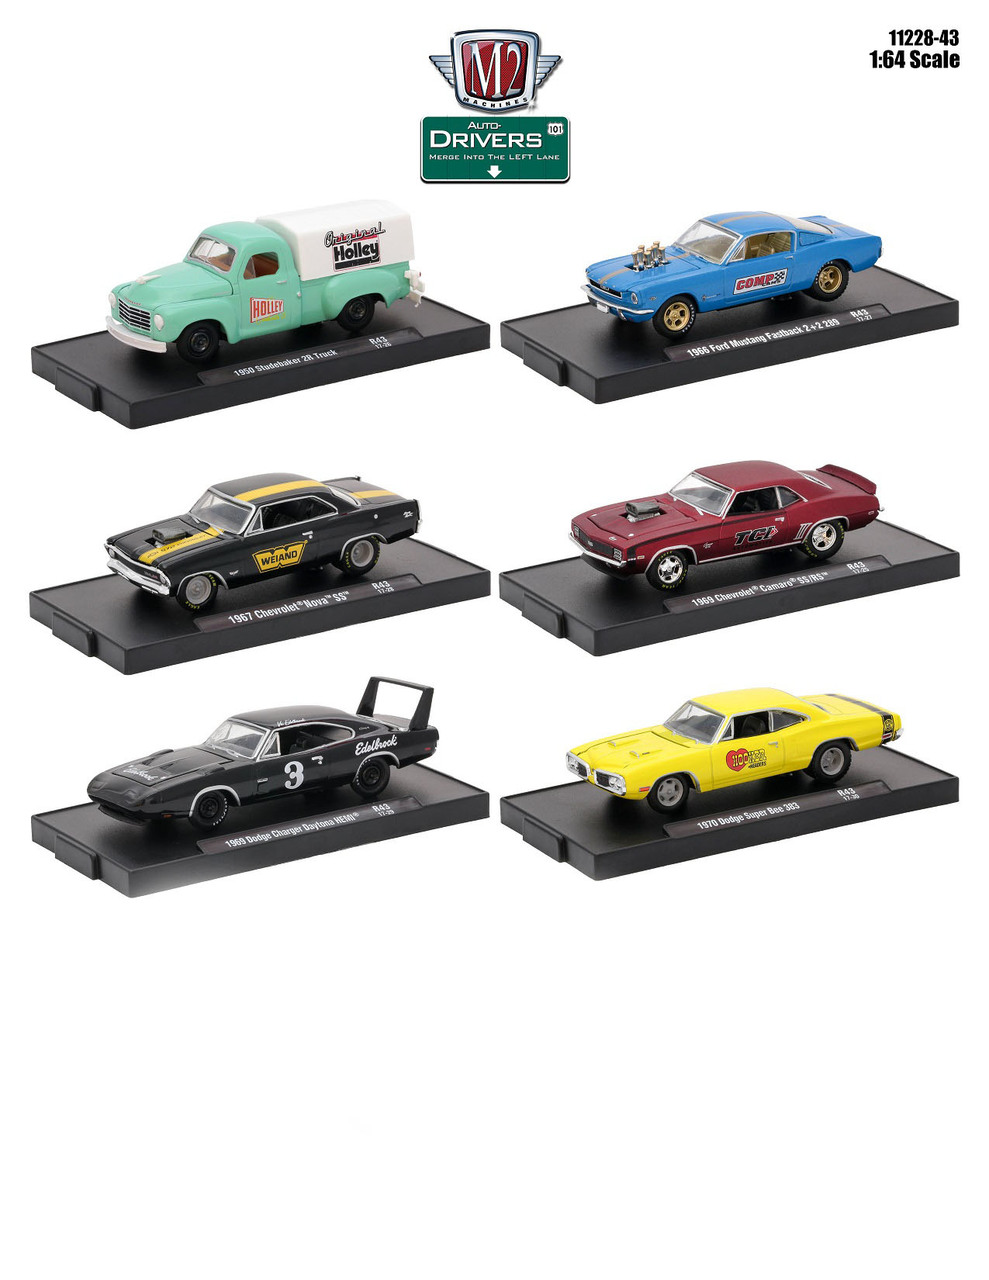 Drivers 6 Cars Set Release 43 In Blister Packs 1/64 Diecast Model Cars By M2 Machines